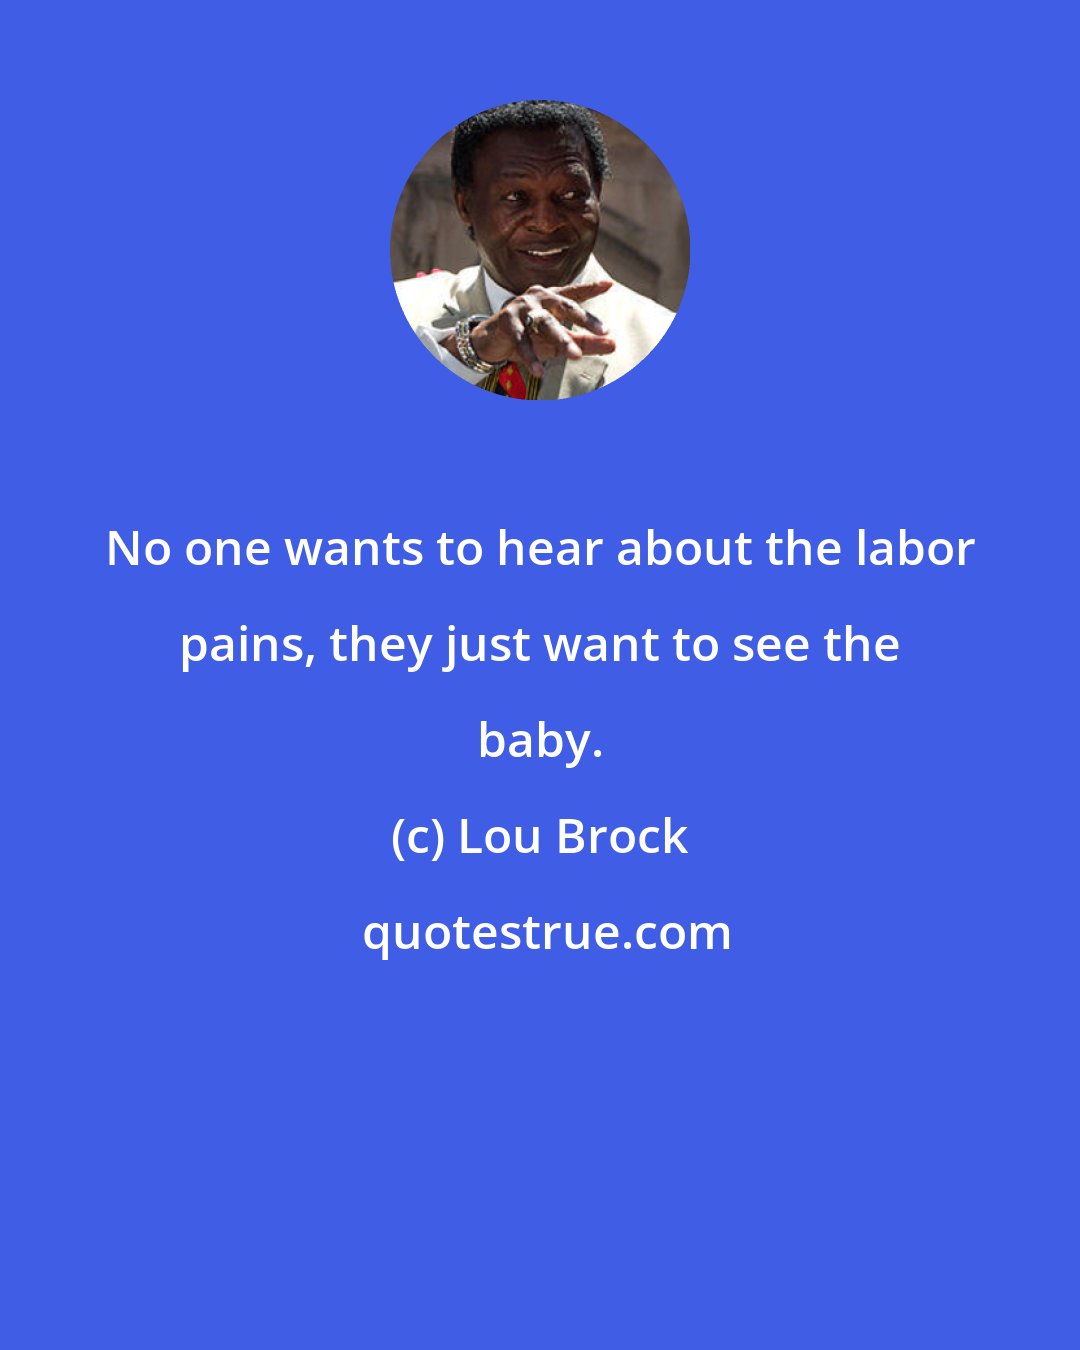 Lou Brock: No one wants to hear about the labor pains, they just want to see the baby.